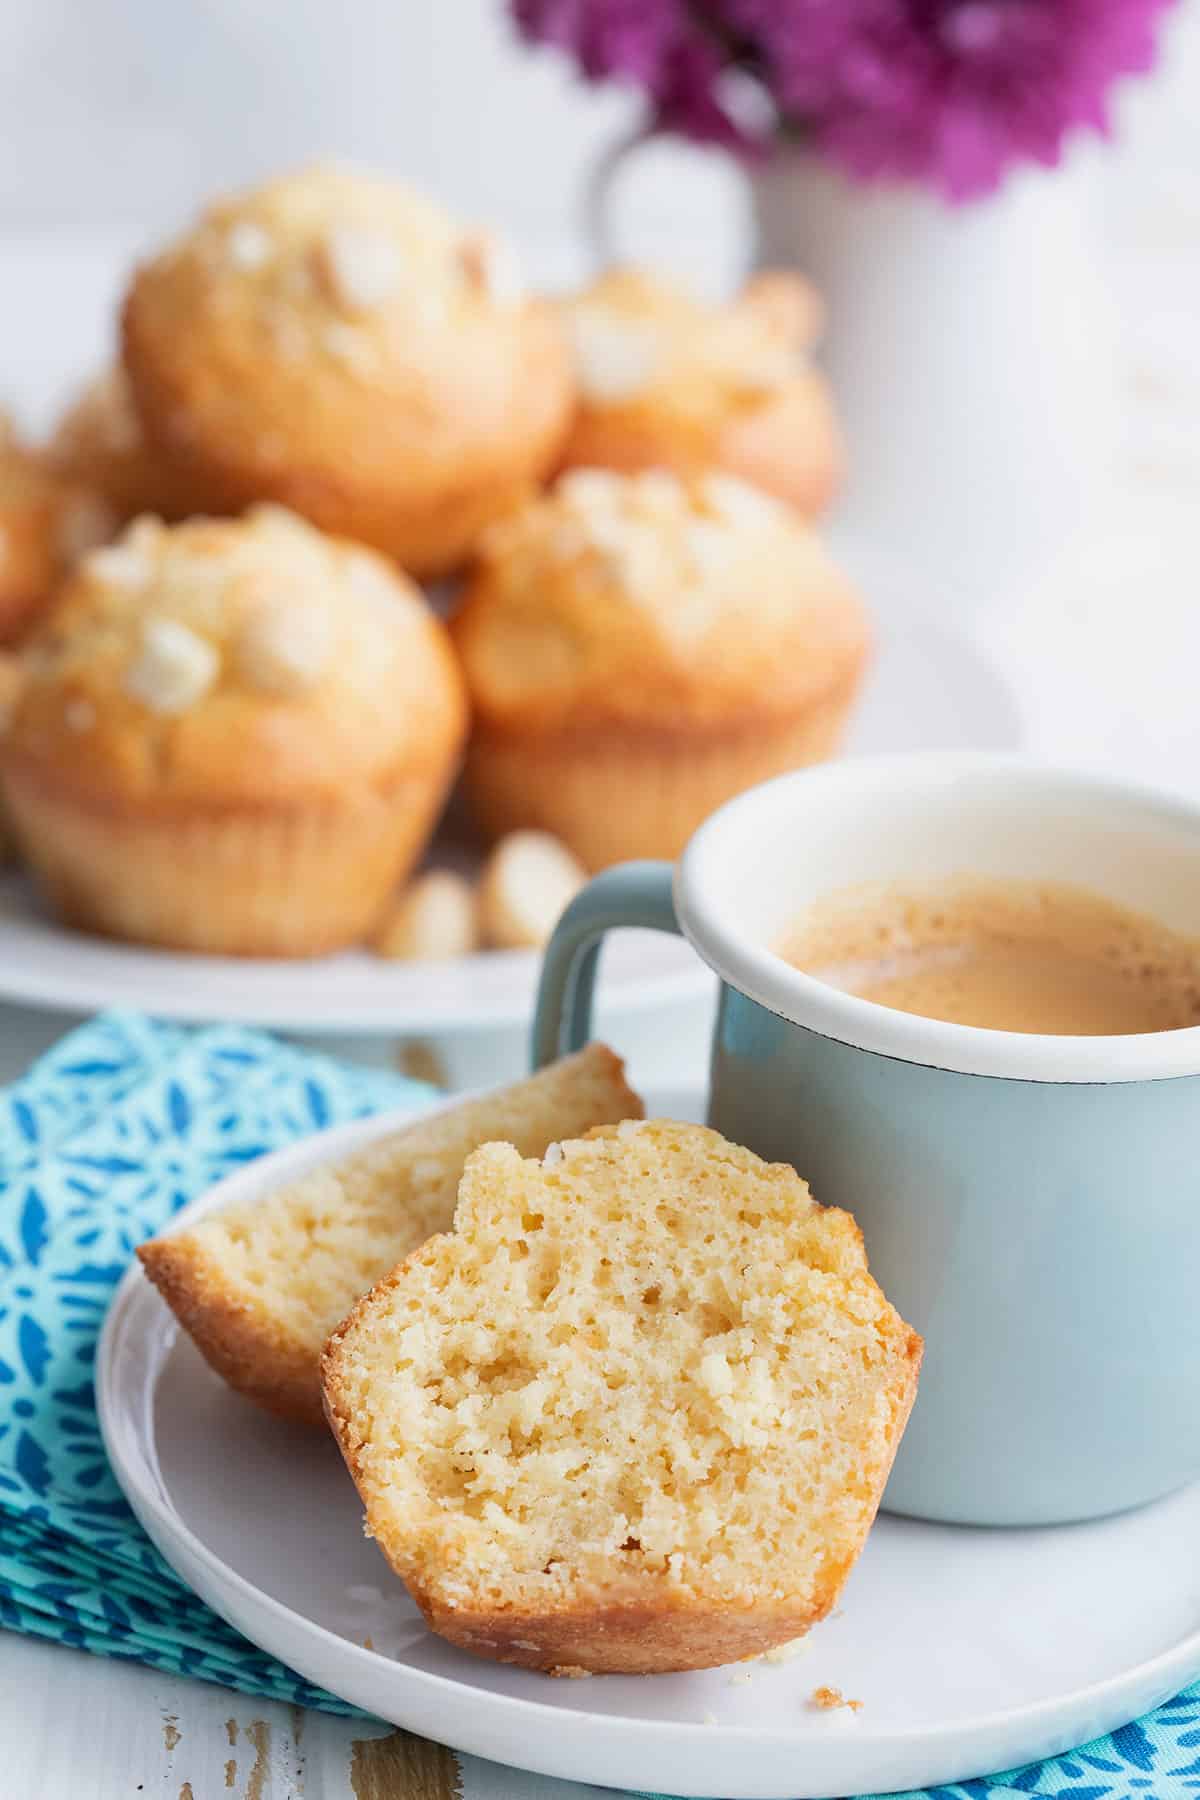 A keto macadamia nut muffin cut open on a white plate with a small cup of coffee.